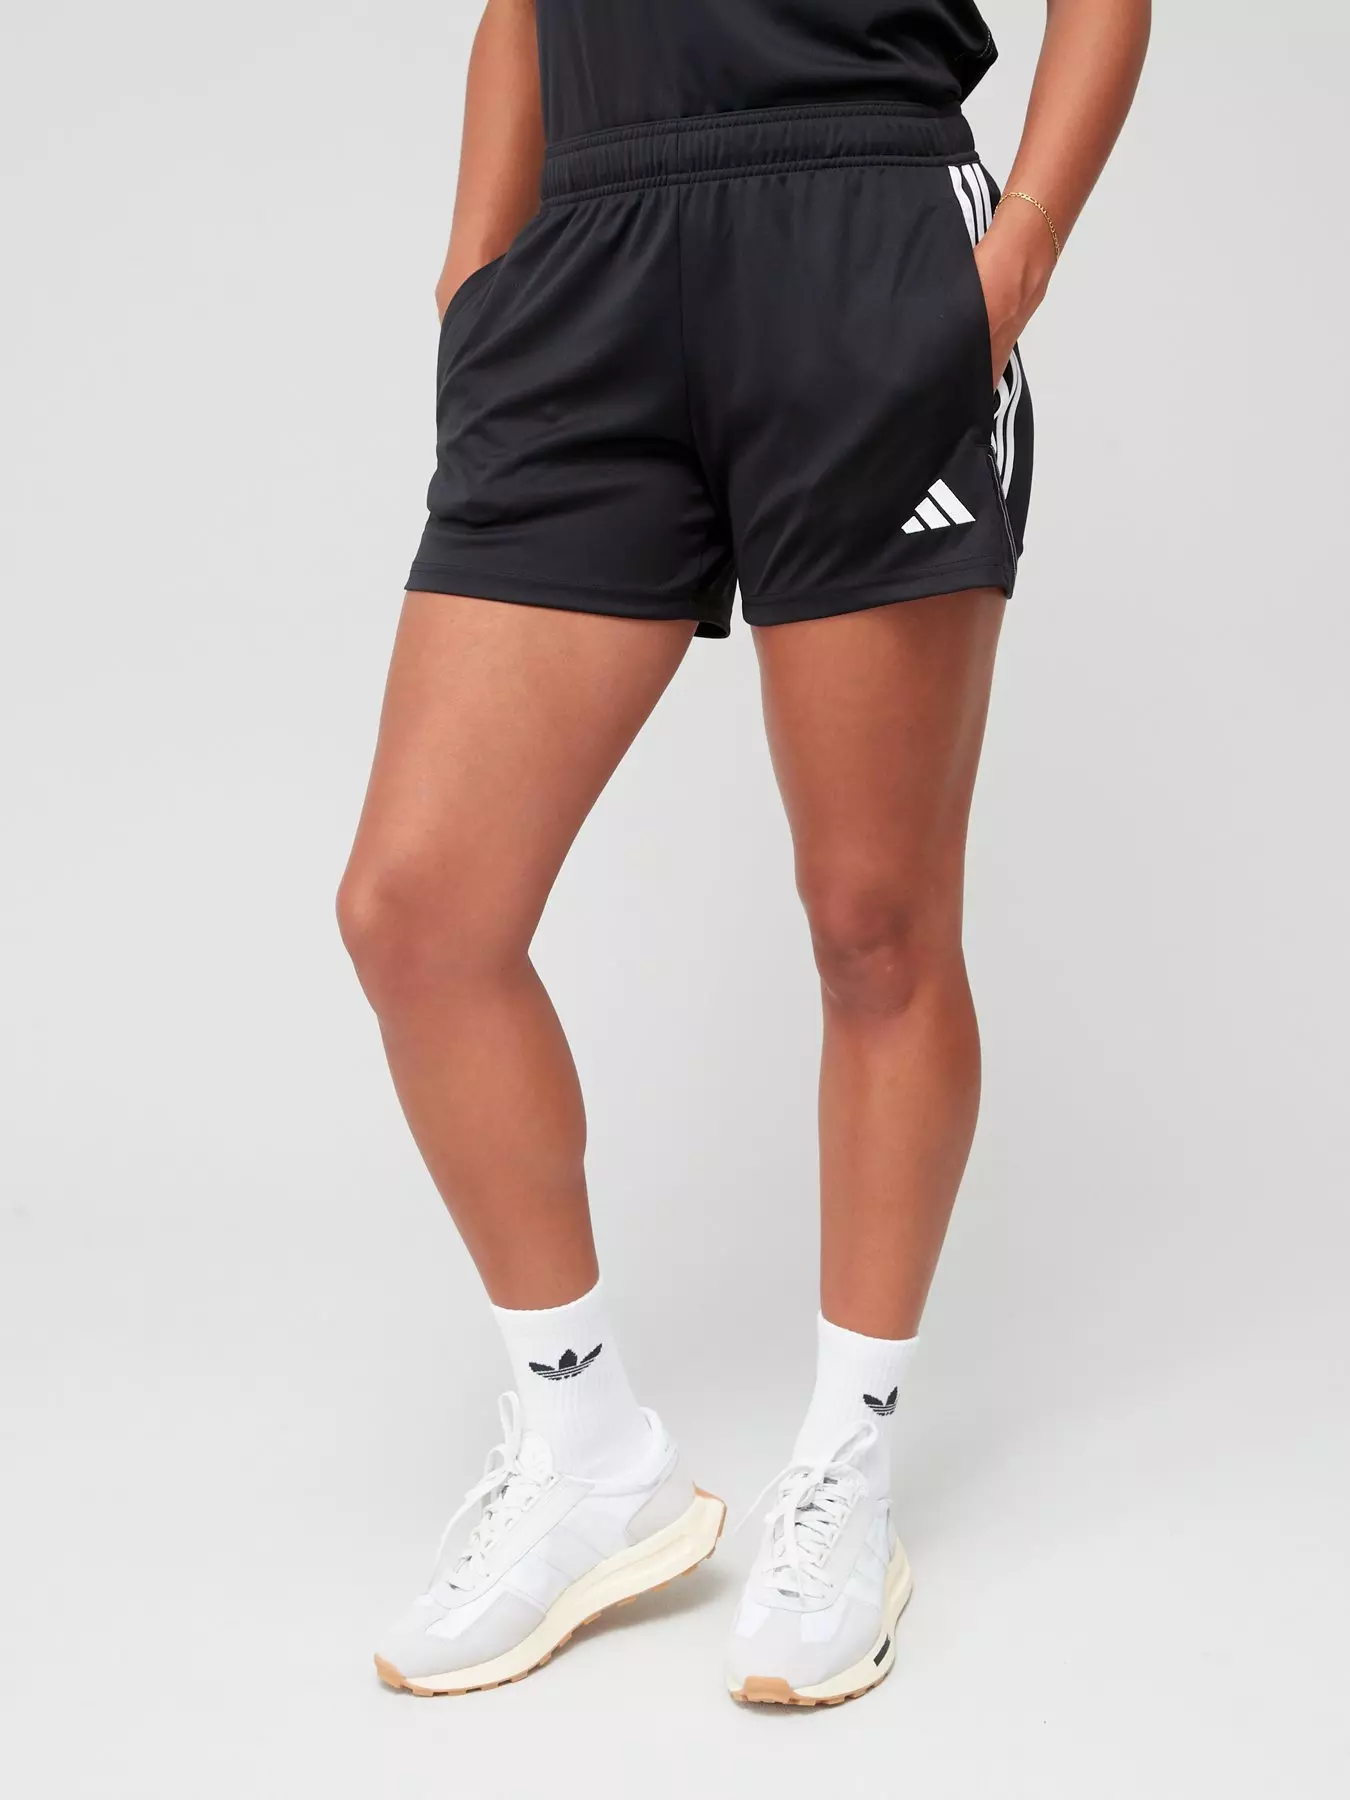 Women's Gym Shorts, Women's Sports Shorts, free delivery